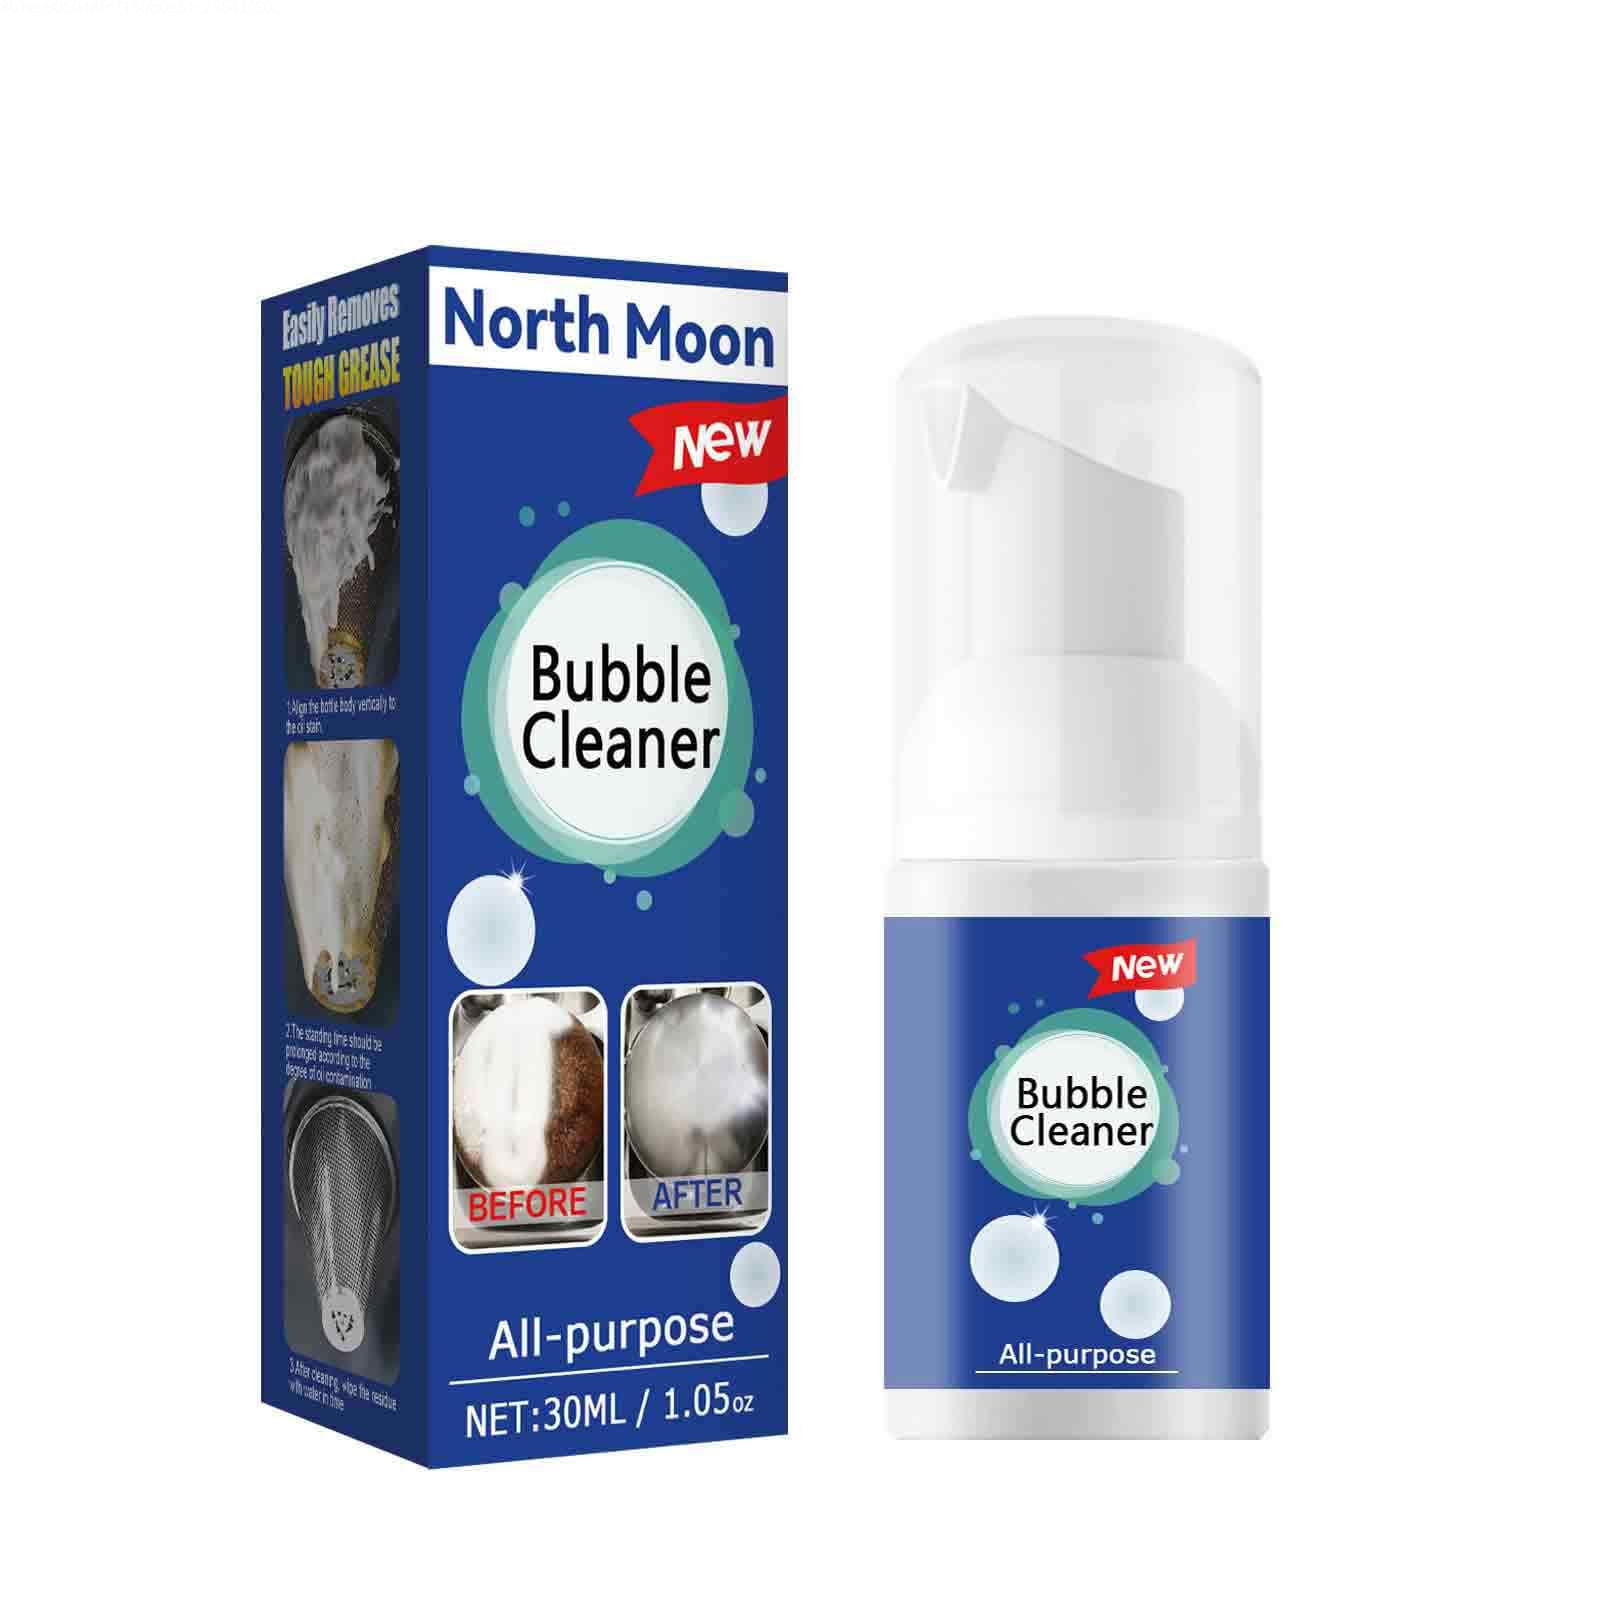  KCRPM Bubble Cleaner Foam Spray, Bubble Cleaner, Kitchen Cleaner  Spray, Foam Cleaner All Purpose, Powerful Stain Removing Foam Cleaner,  North Moon Bubble Cleaner Foam (100ml, 2pcs) : Health & Household